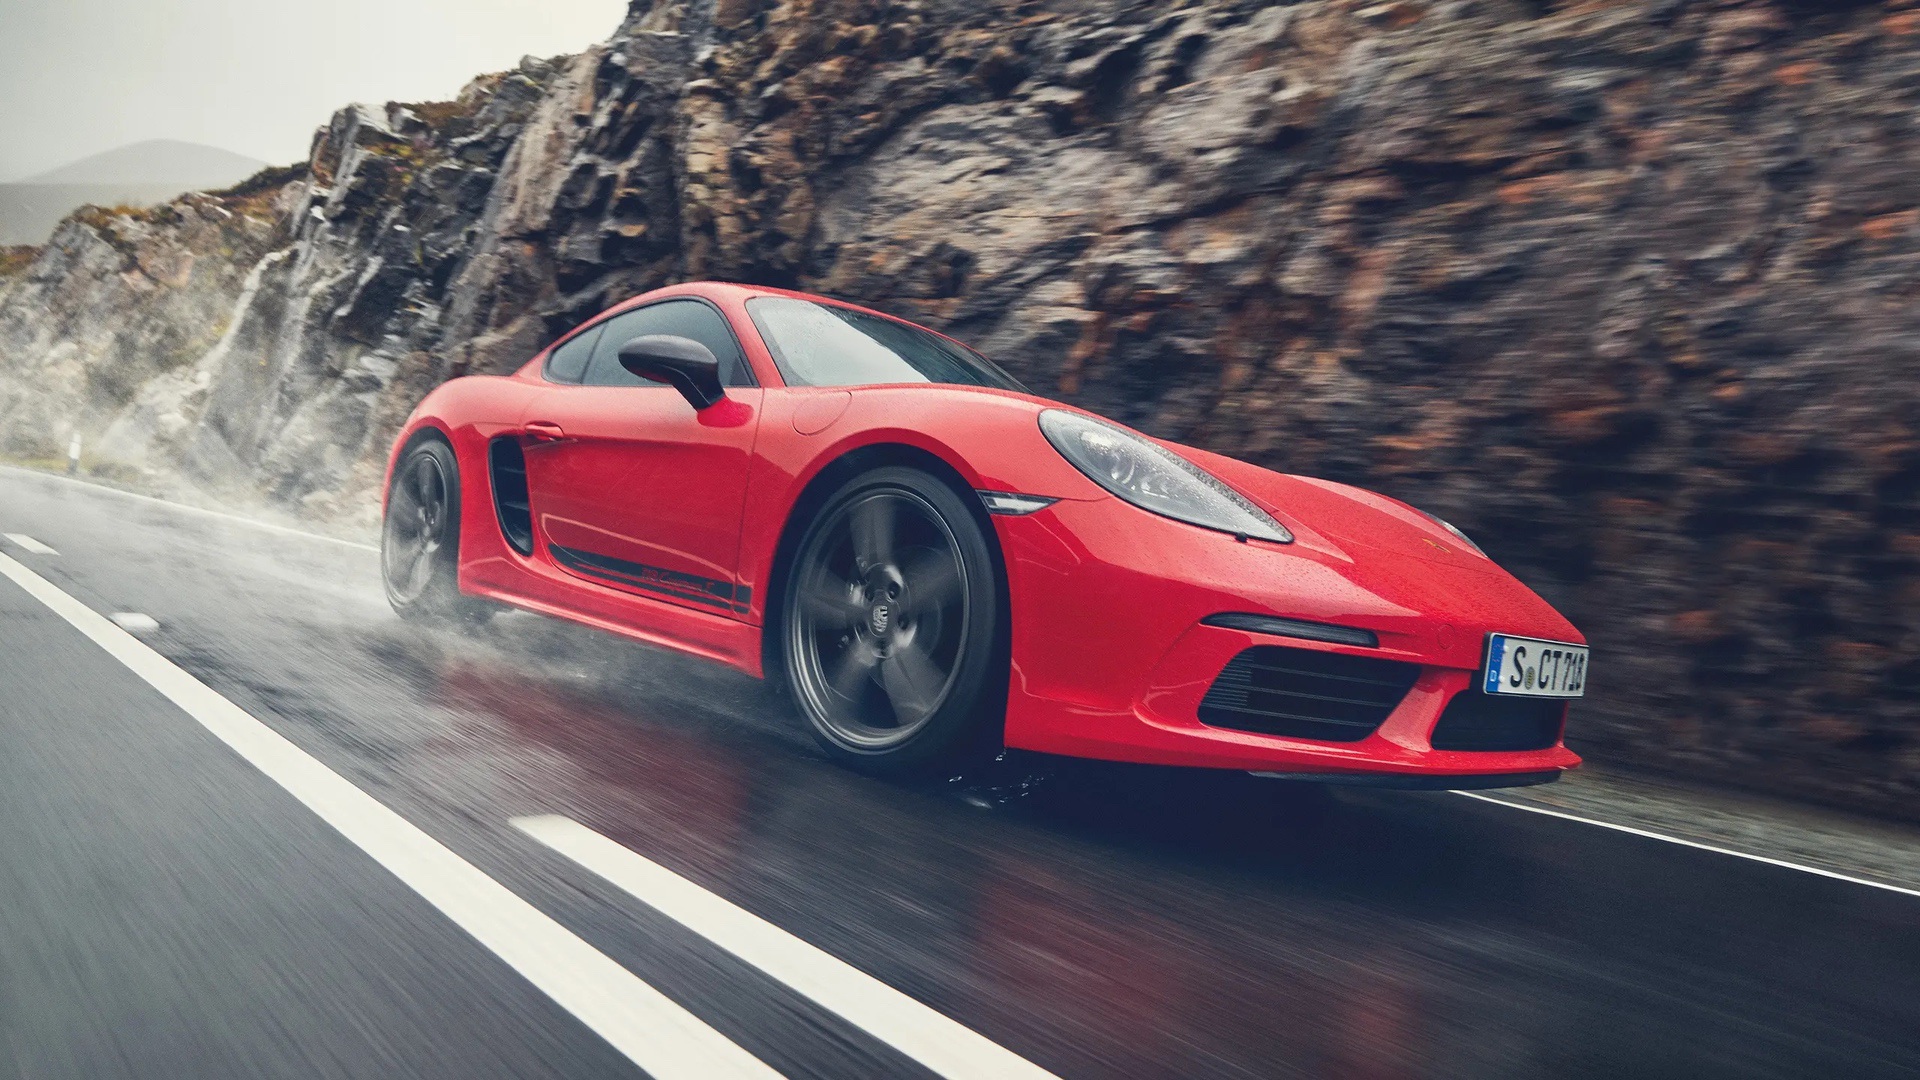 Wet or dry, we would choose the Porsche 718 Cayman S as our daily driver, but only after giving the Lotus Emira a very long look and a test drive or two. The two are that close.